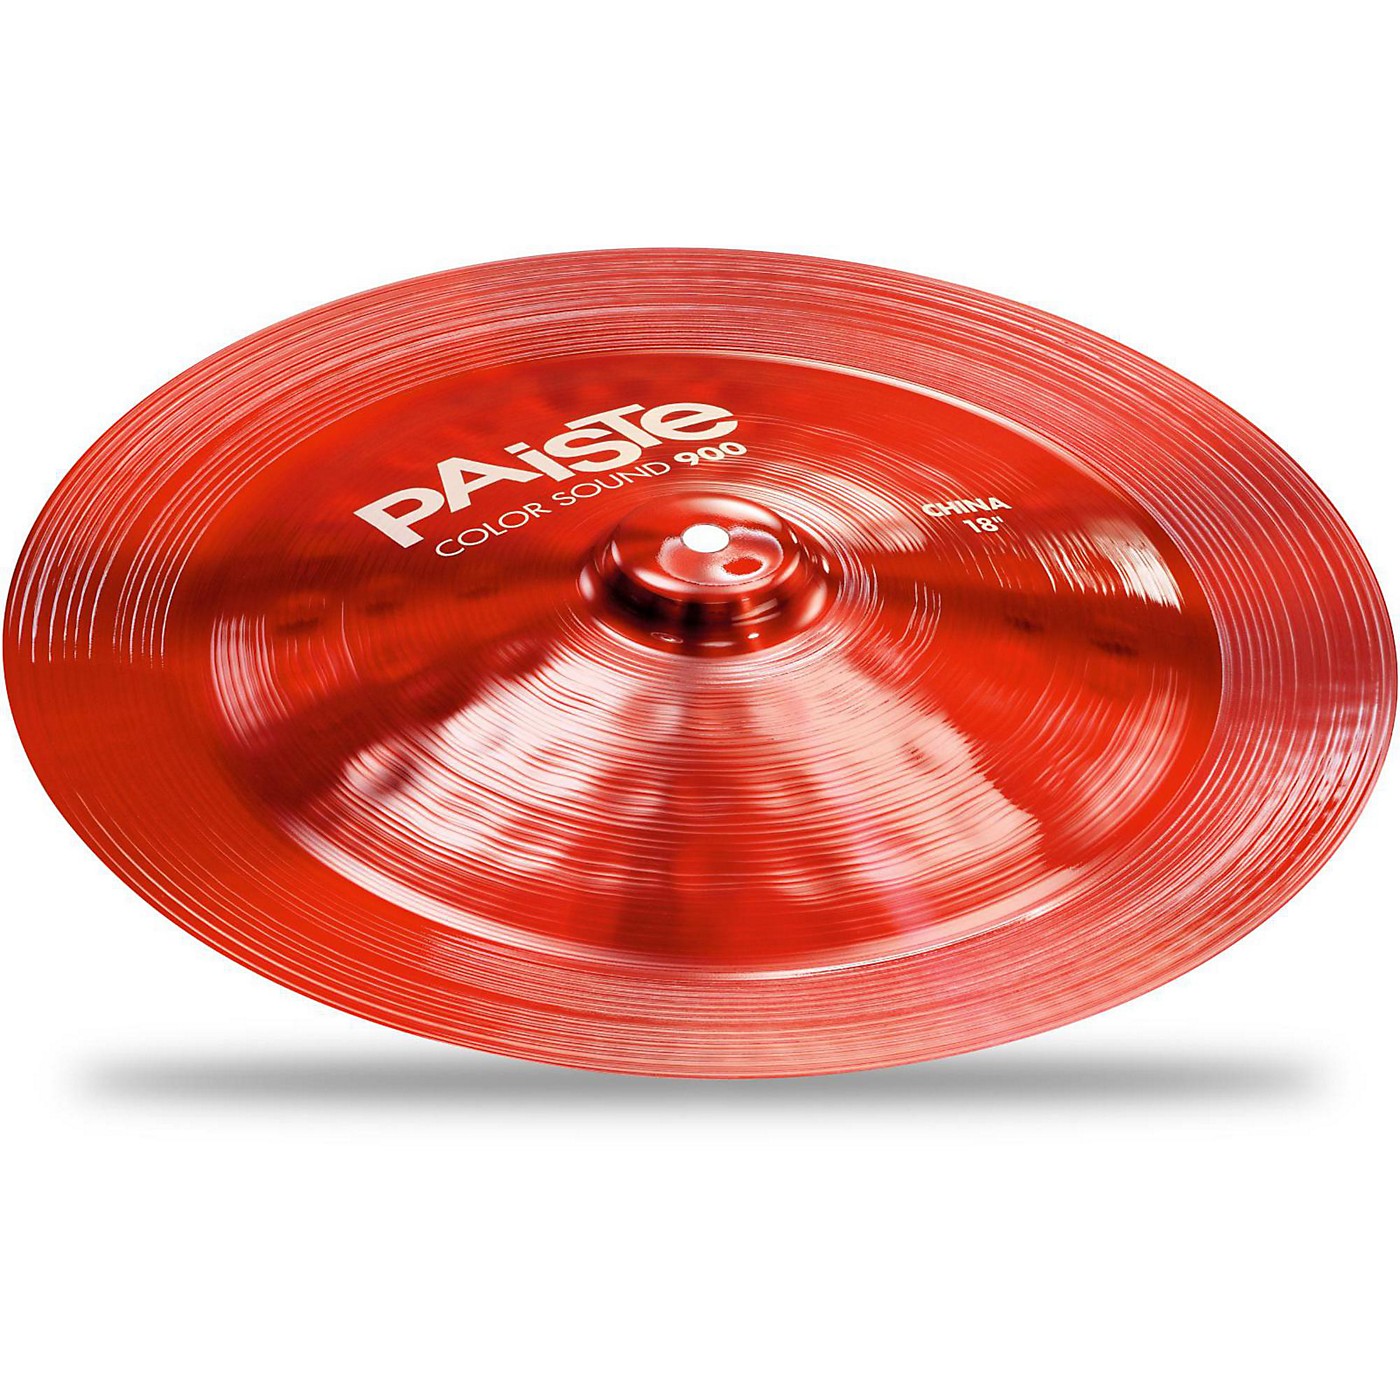 Paiste Colorsound 900 China Cymbal Red thumbnail